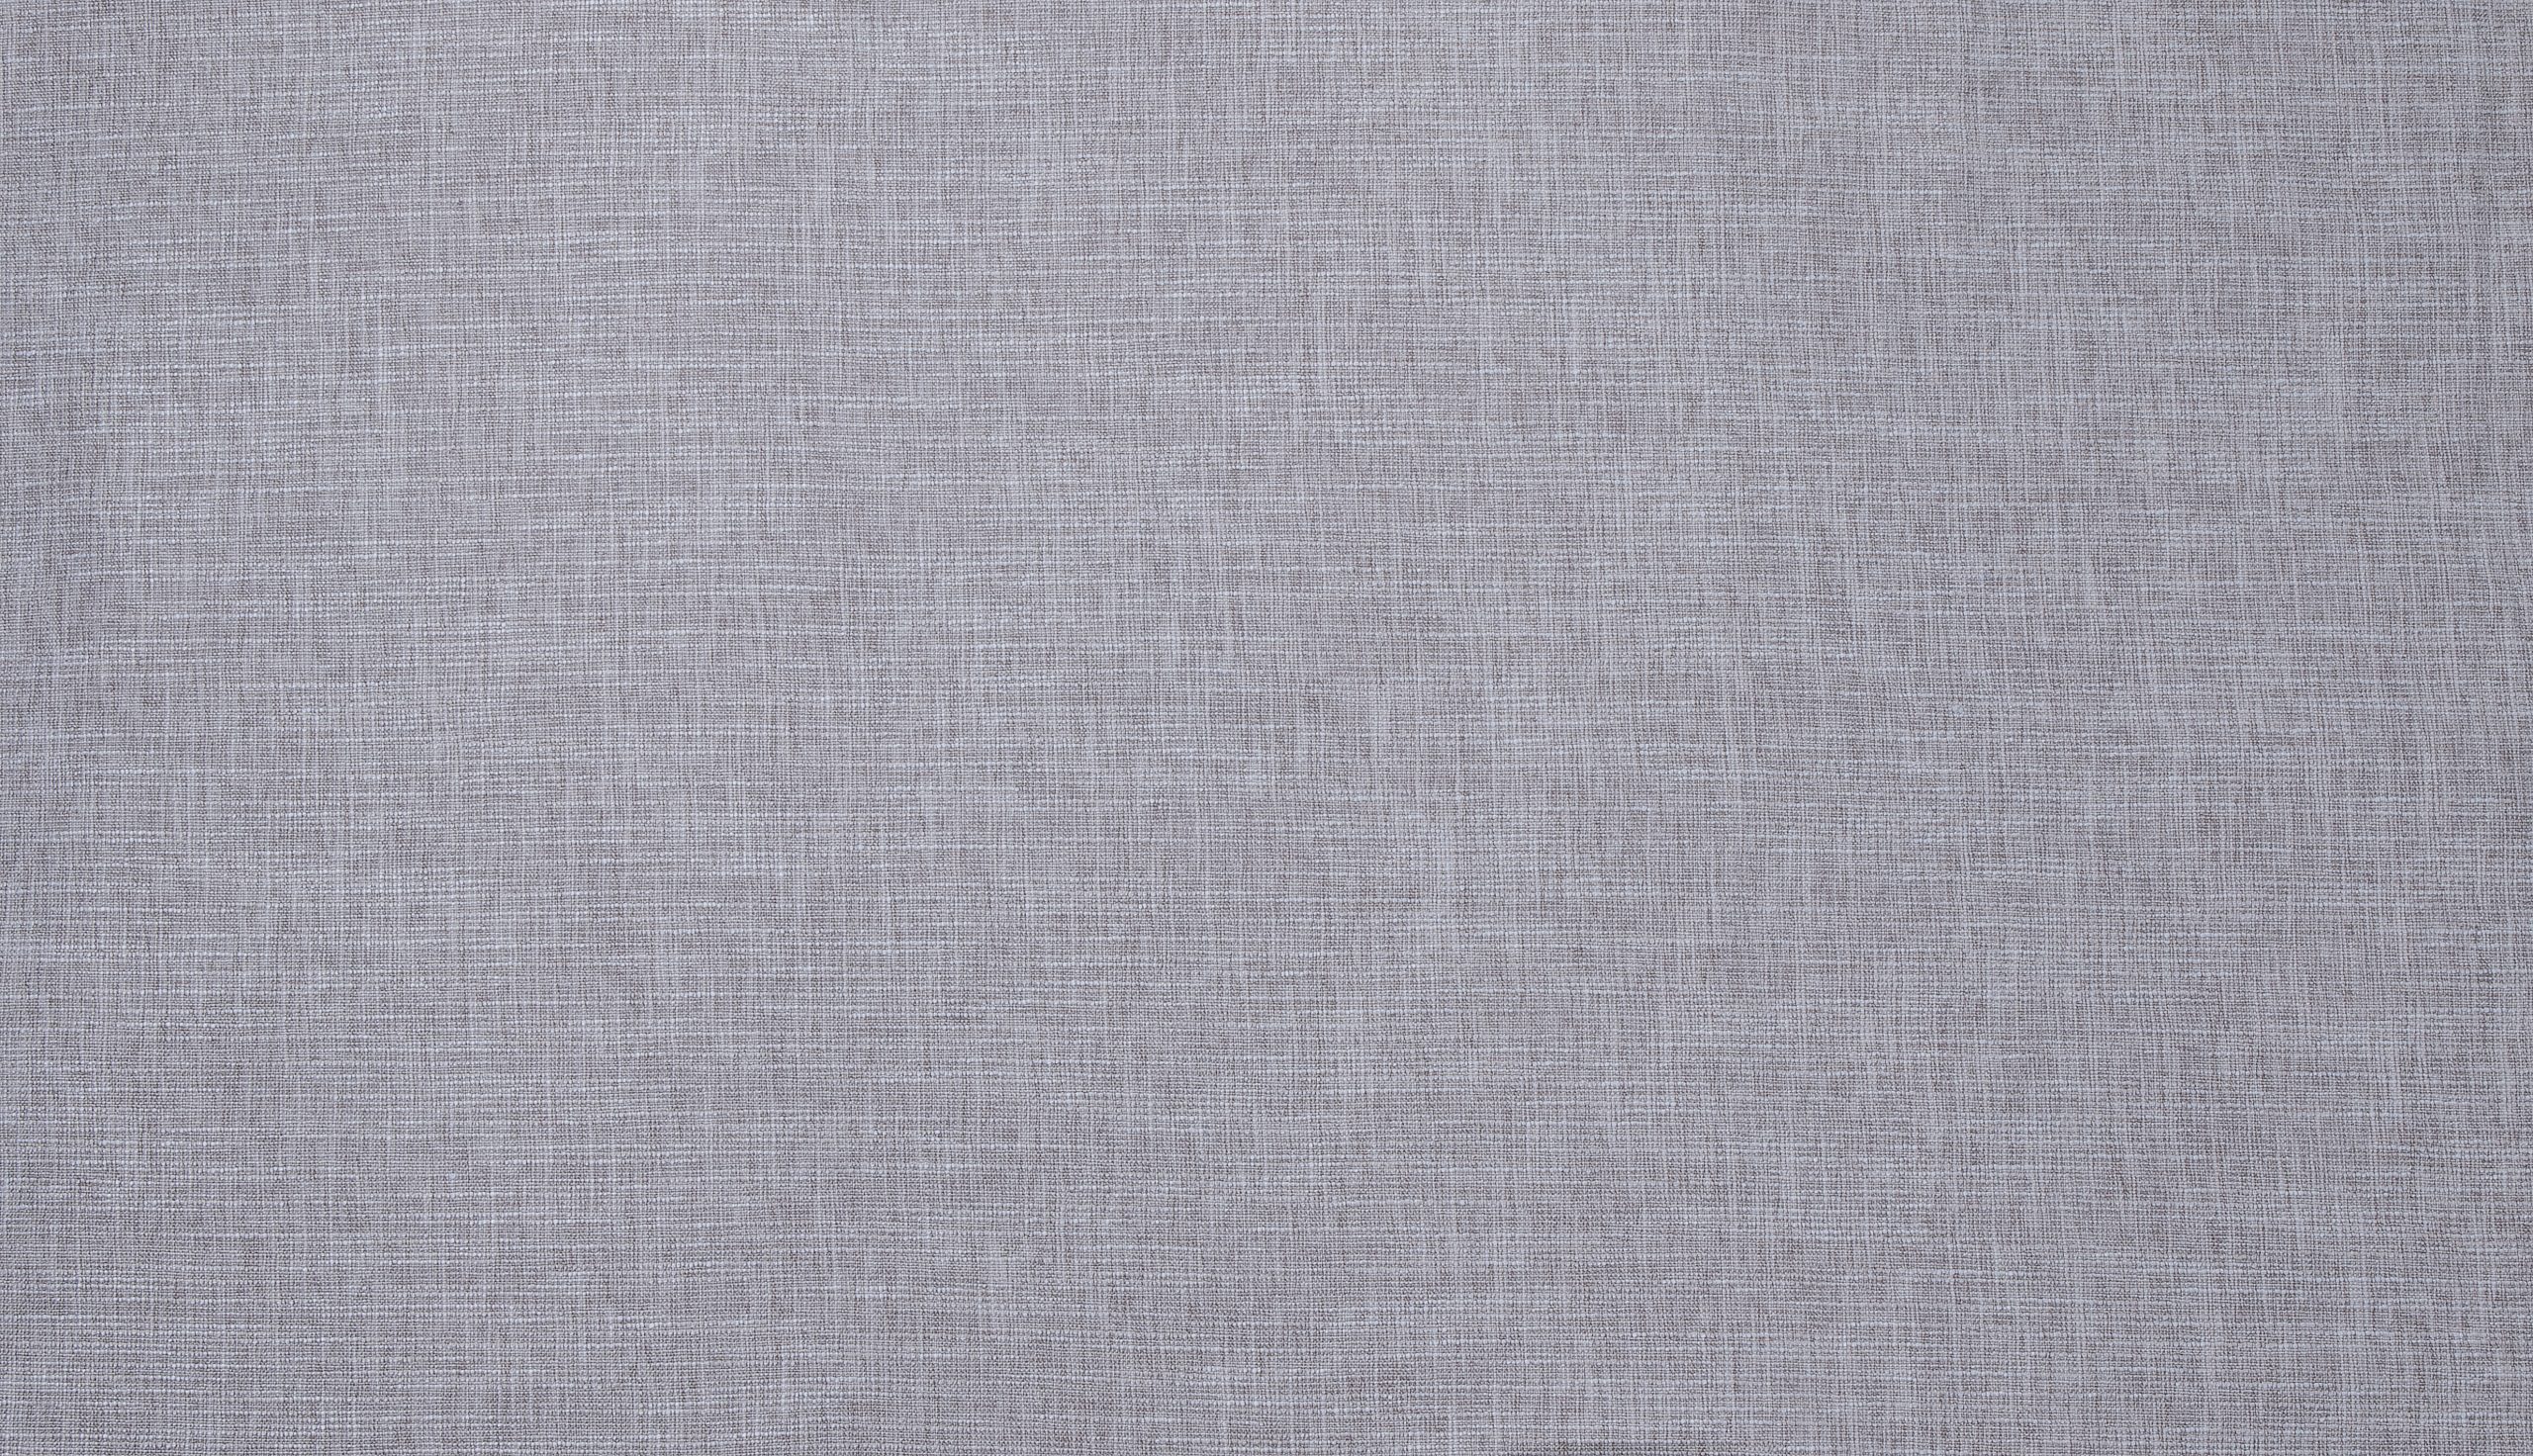 Relaxed Plains Esme Stardust Fabric